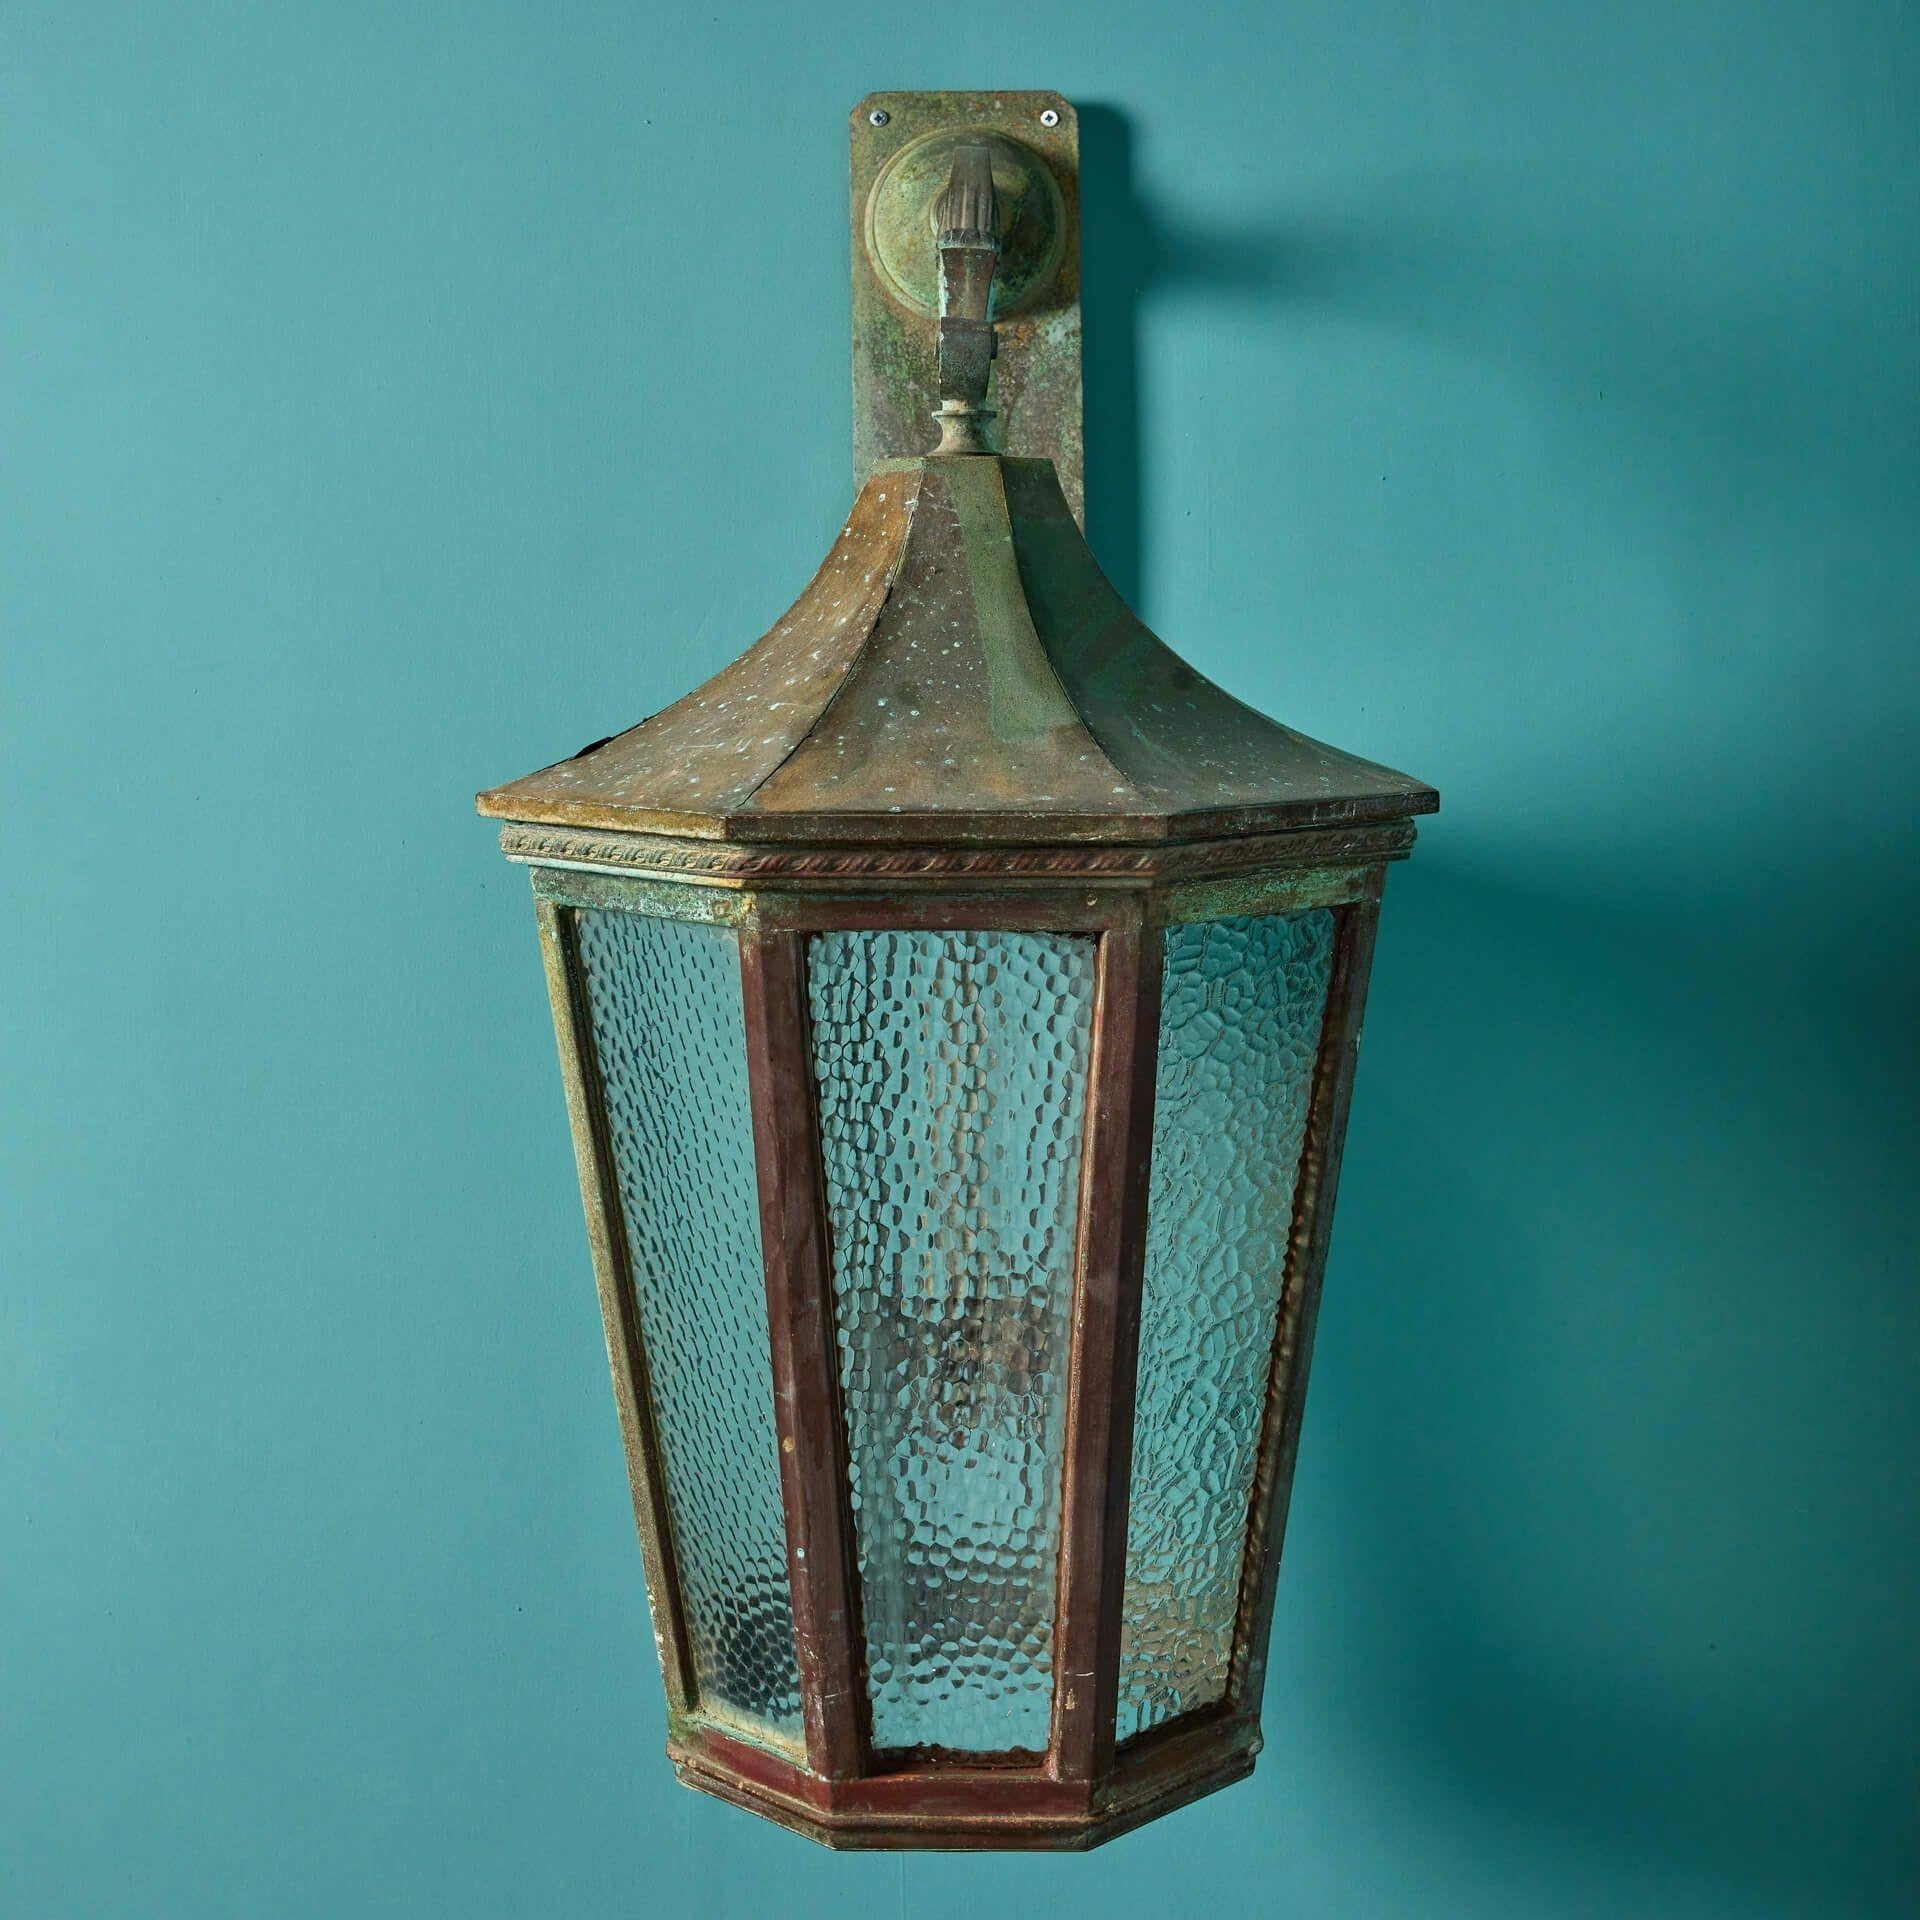 An antique solid bronze wall lantern dating to the early 20th century, suitable for indoor or outdoor use. This lantern is beautifully styled with its weathered bronze creating an unusual eye-catching verdigris patination. The textured obscured